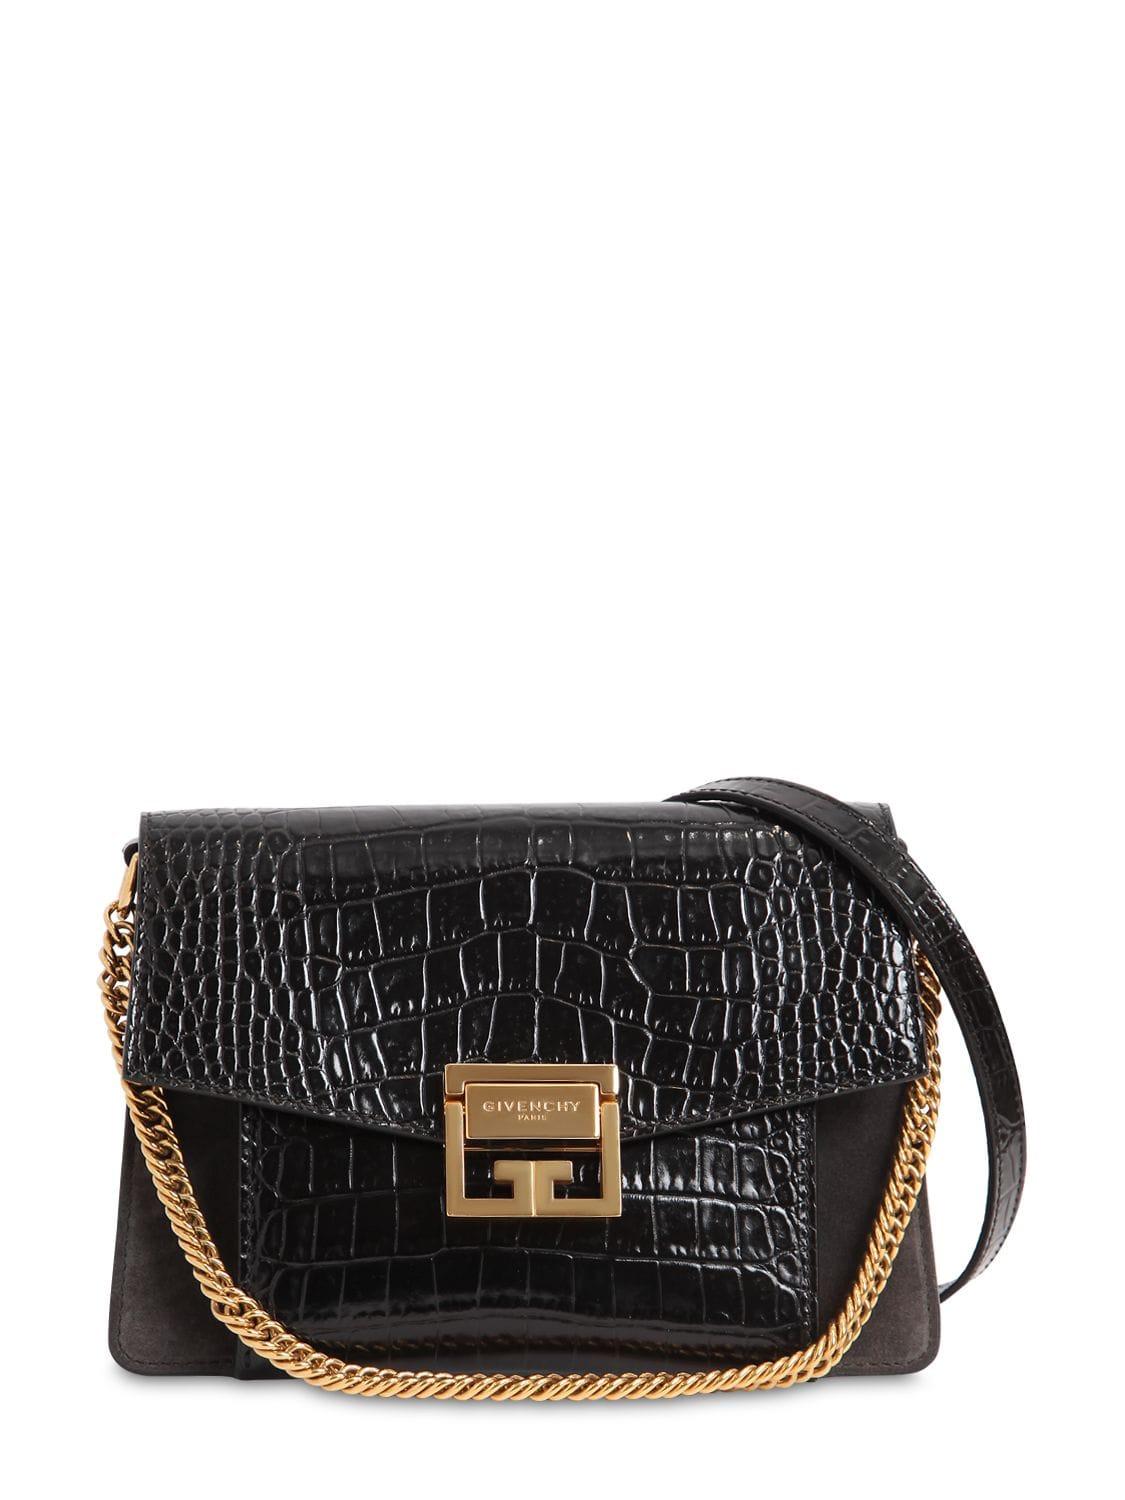 Givenchy Small G3 Croc Embossed Leather Bag in Black - Lyst